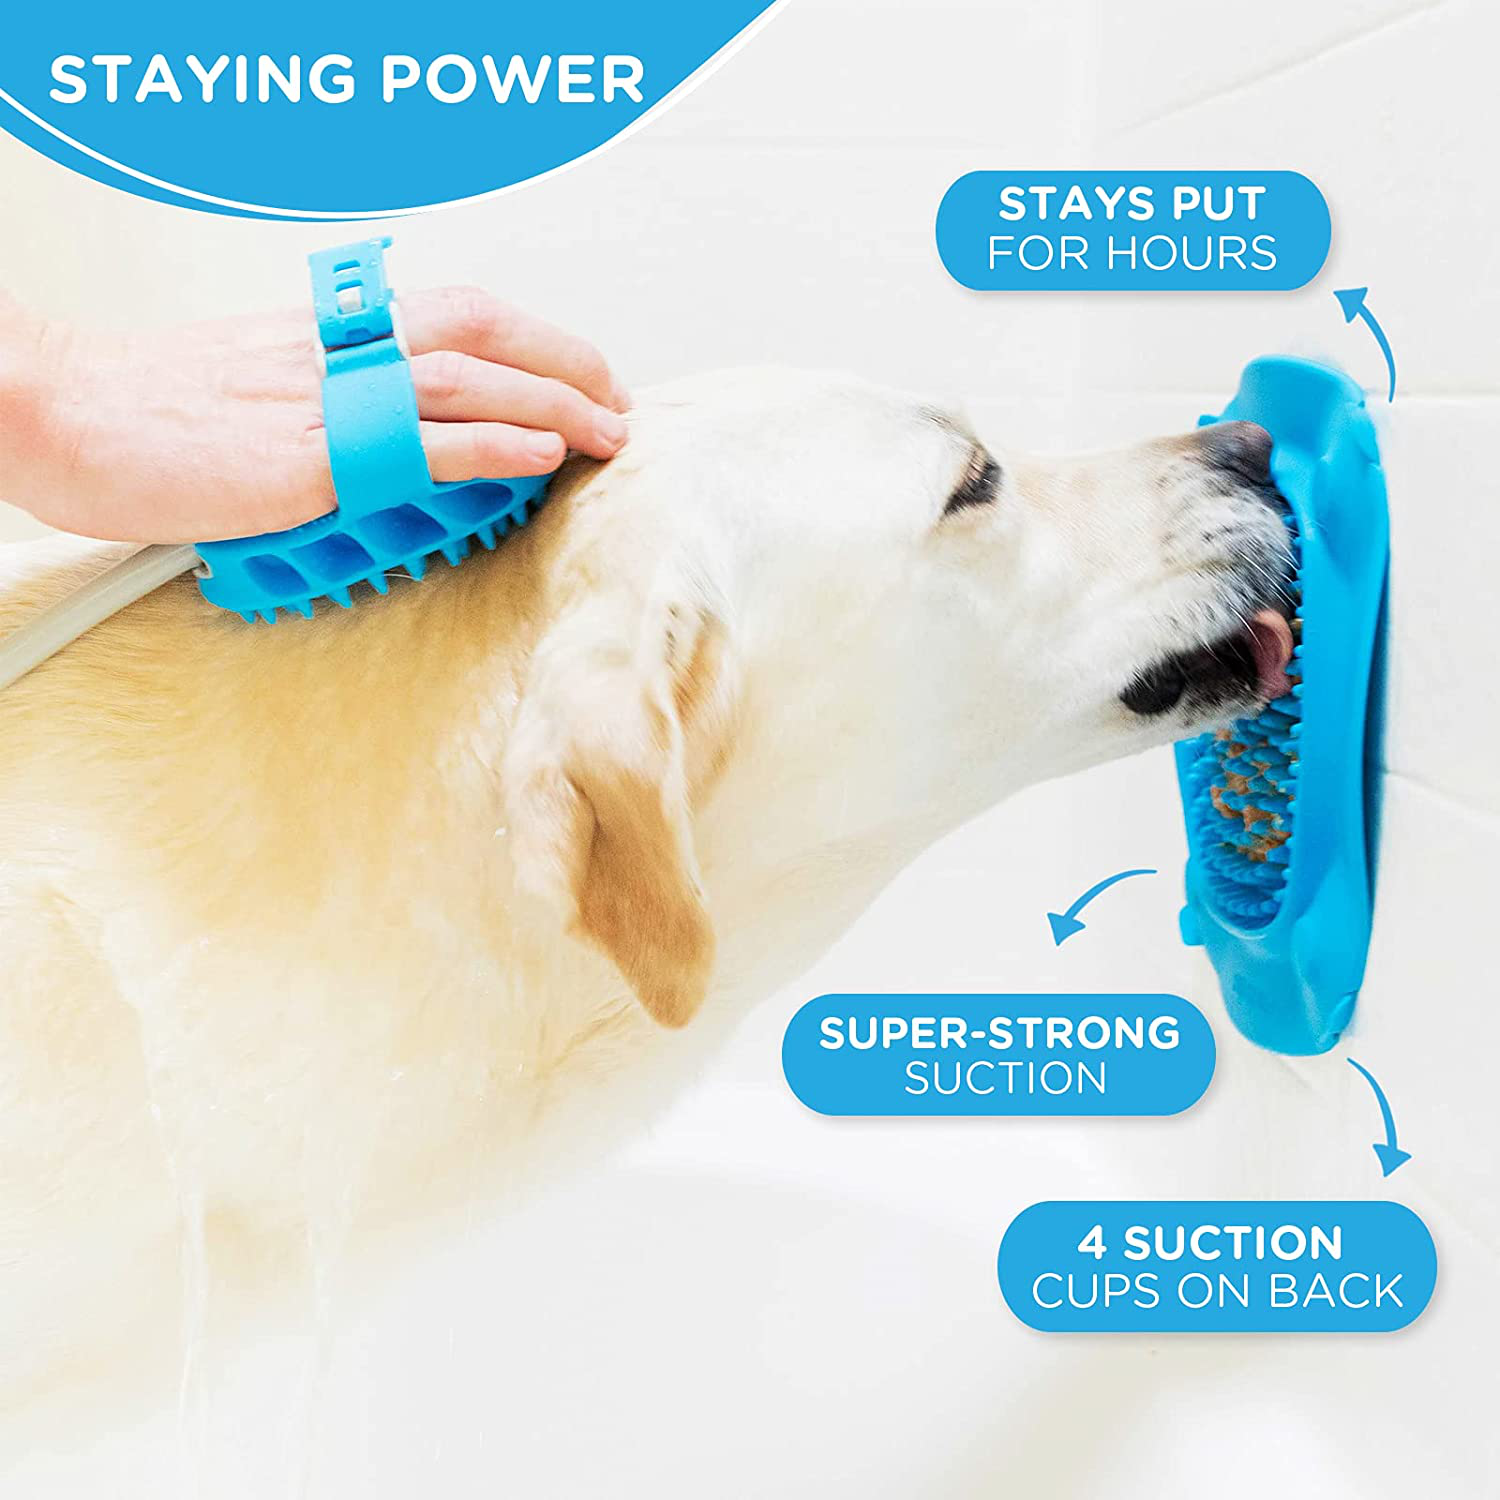 Aquapaw XL Slow Treater Treat-Dispensing Licky Mat – Puzzle Feeder Toy/Licking Pad for Dogs & Other Large Pets, Suctions to Wall/Floor – Relieves Boredom & Anxiety during Grooming, Vet Visits & Storms Animals & Pet Supplies > Pet Supplies > Dog Supplies > Dog Kennels & Runs Aquapaw   